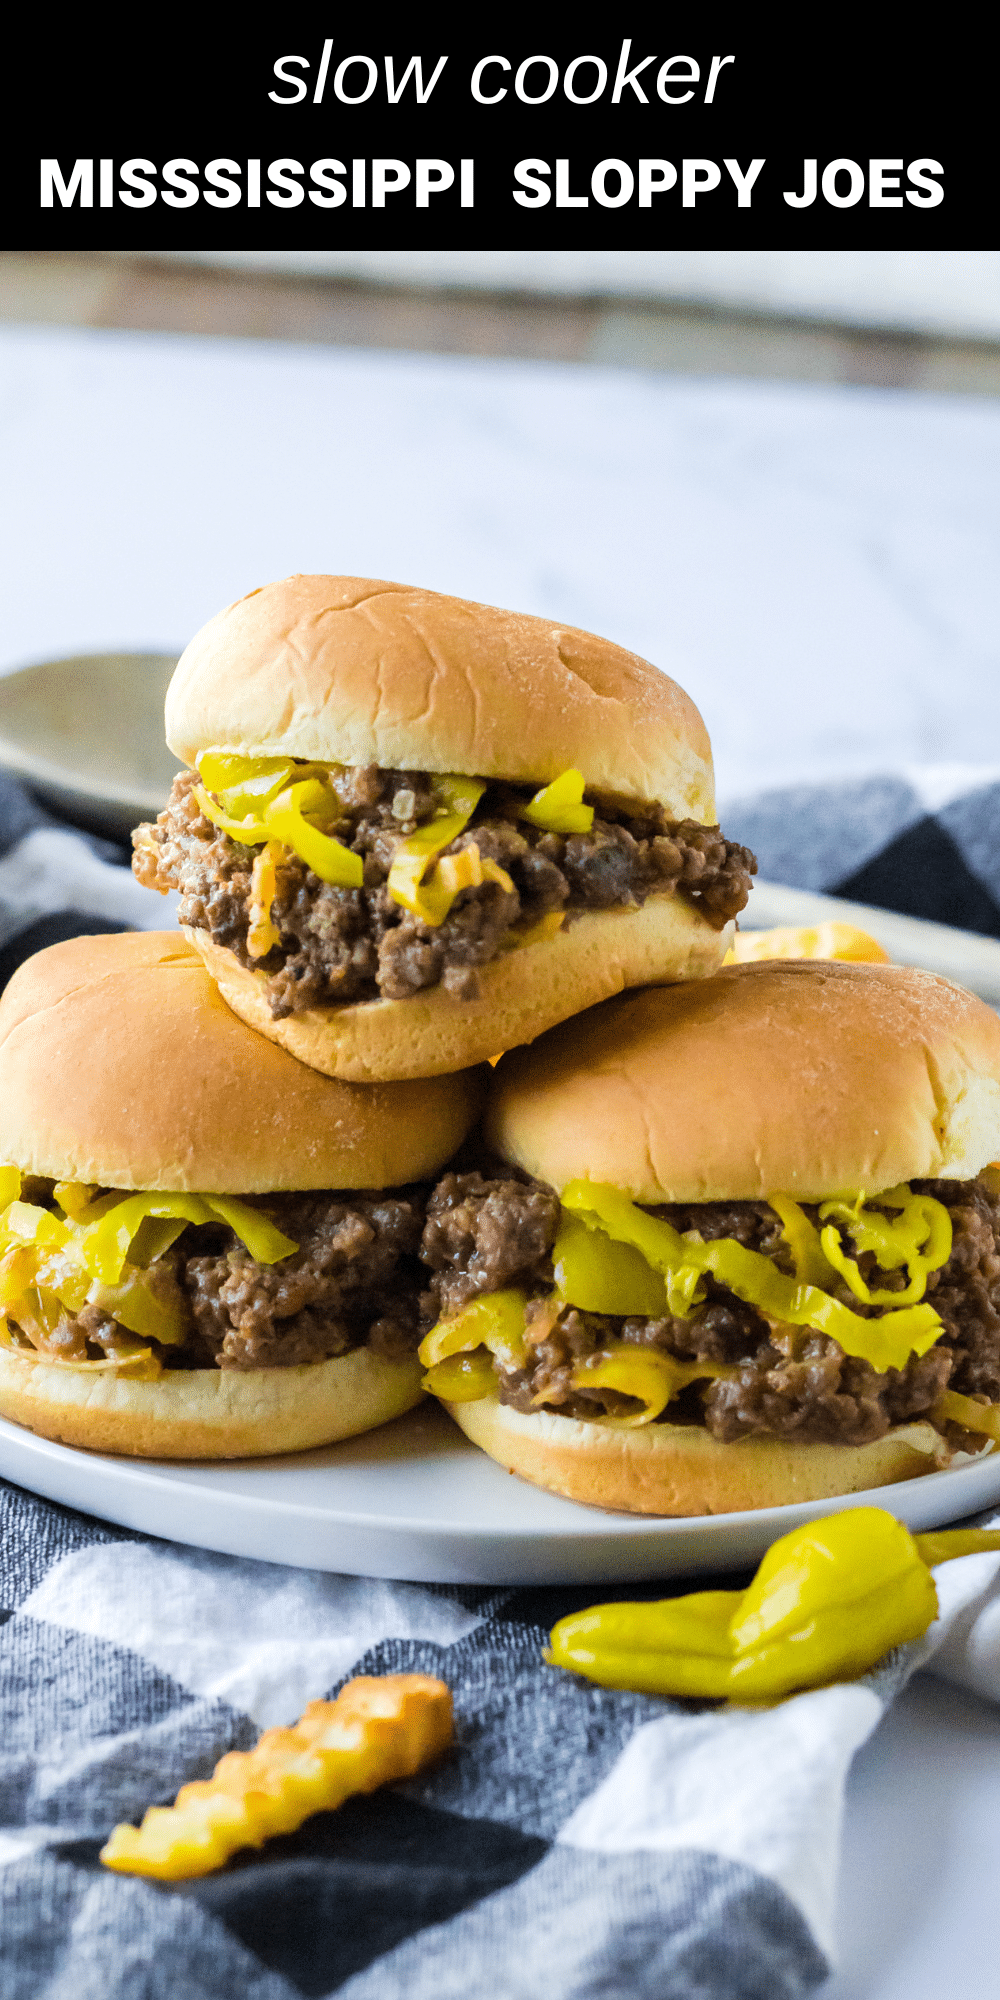 These slow cooker Mississippi sloppy Joes are a delicious twist on a classic sloppy Joe recipe. Hearty and flavorful, this easy recipe deserves a permanent spot in your dinner rotation.